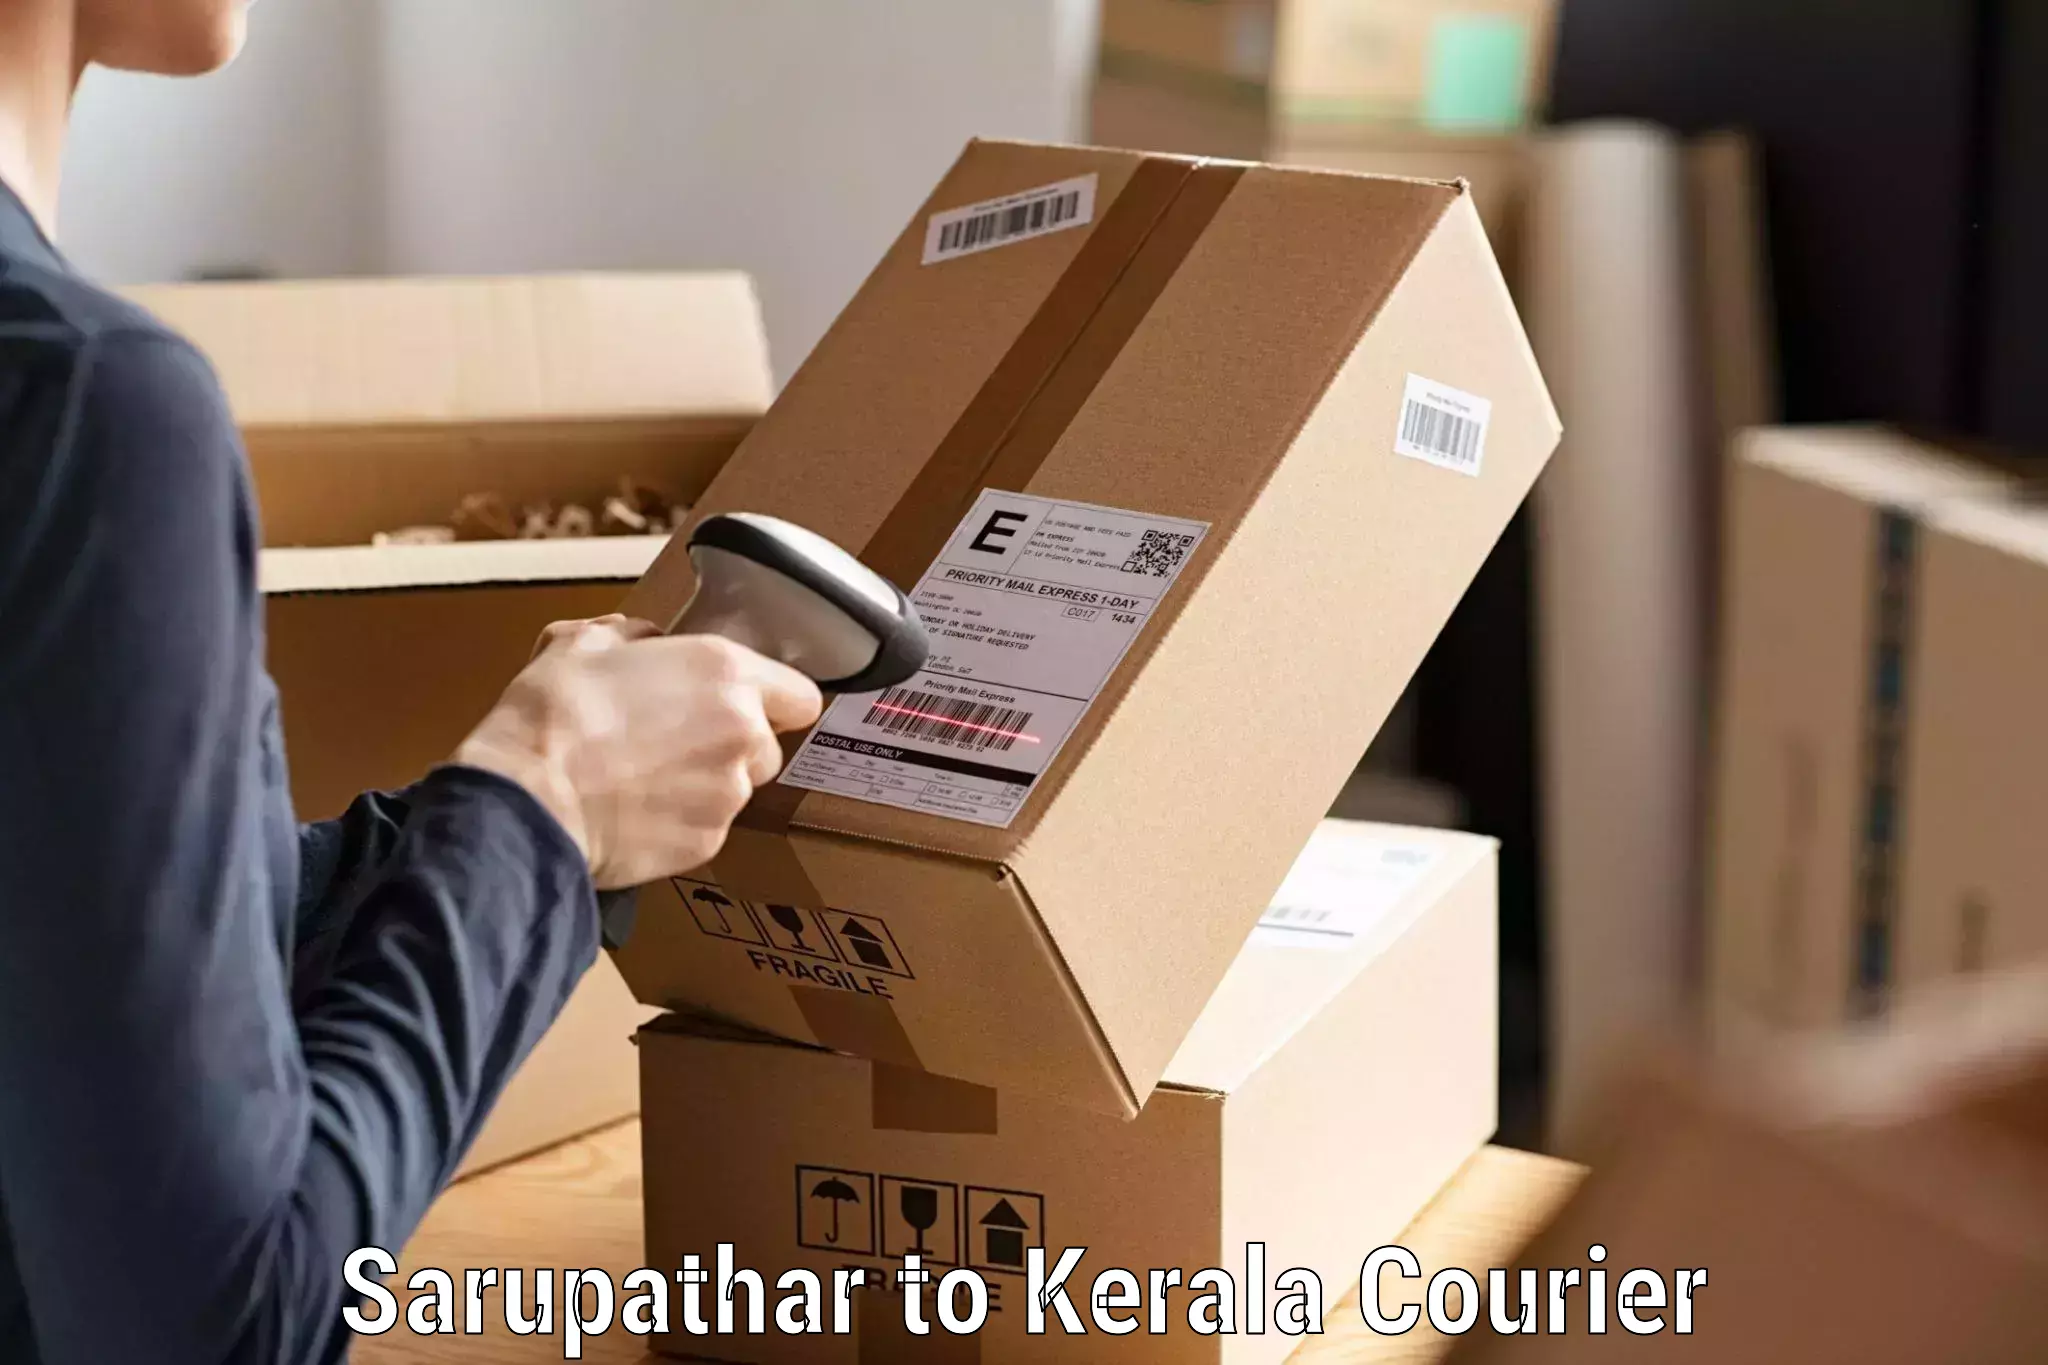 Reliable courier service Sarupathar to Cochin Port Kochi